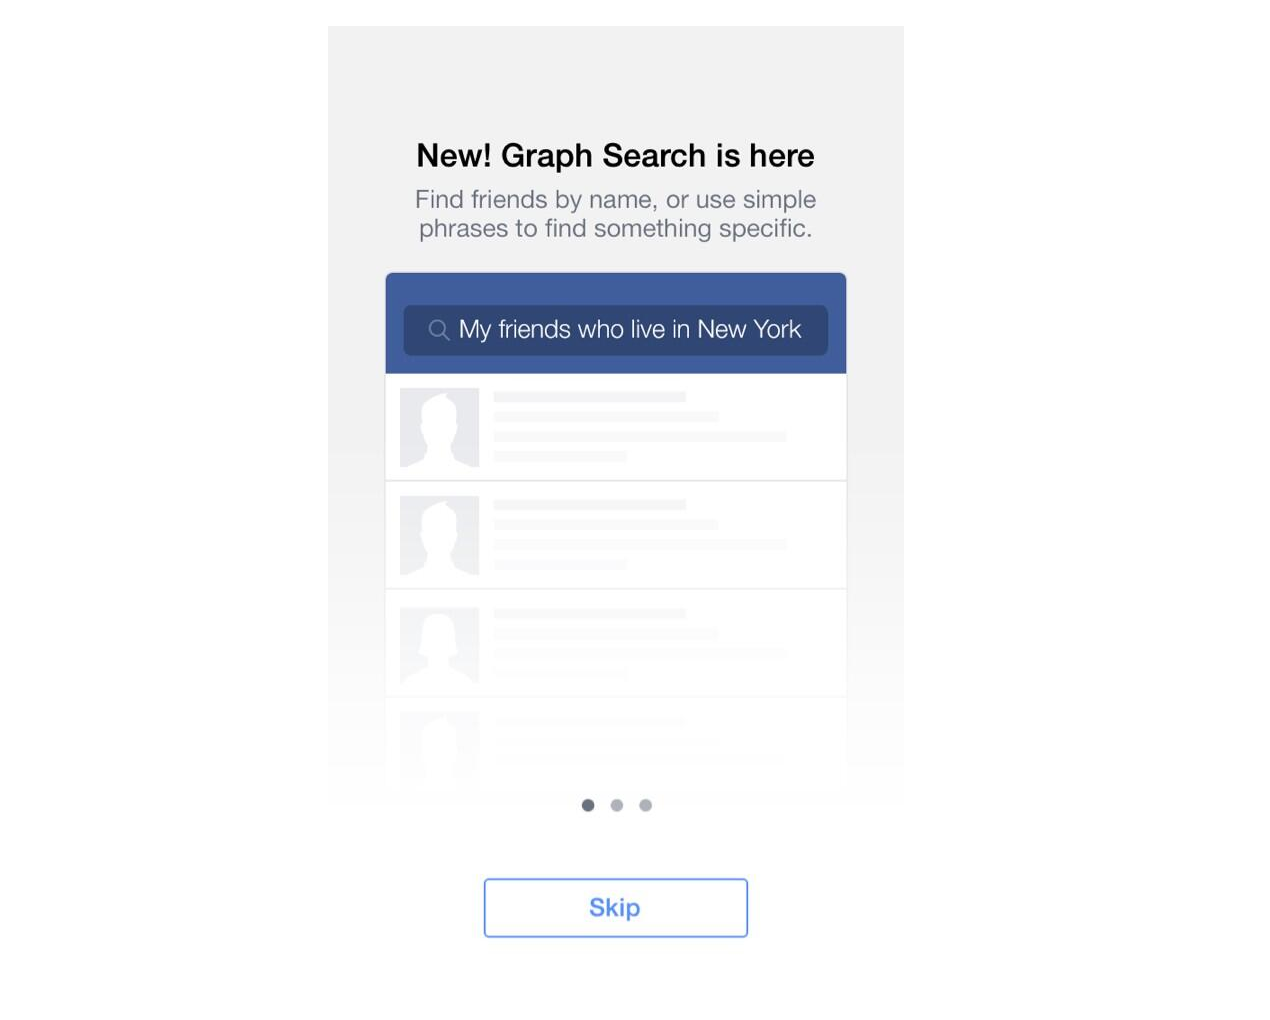 facebook testing graph search on its ios and android apps as mobile becomes king image 2